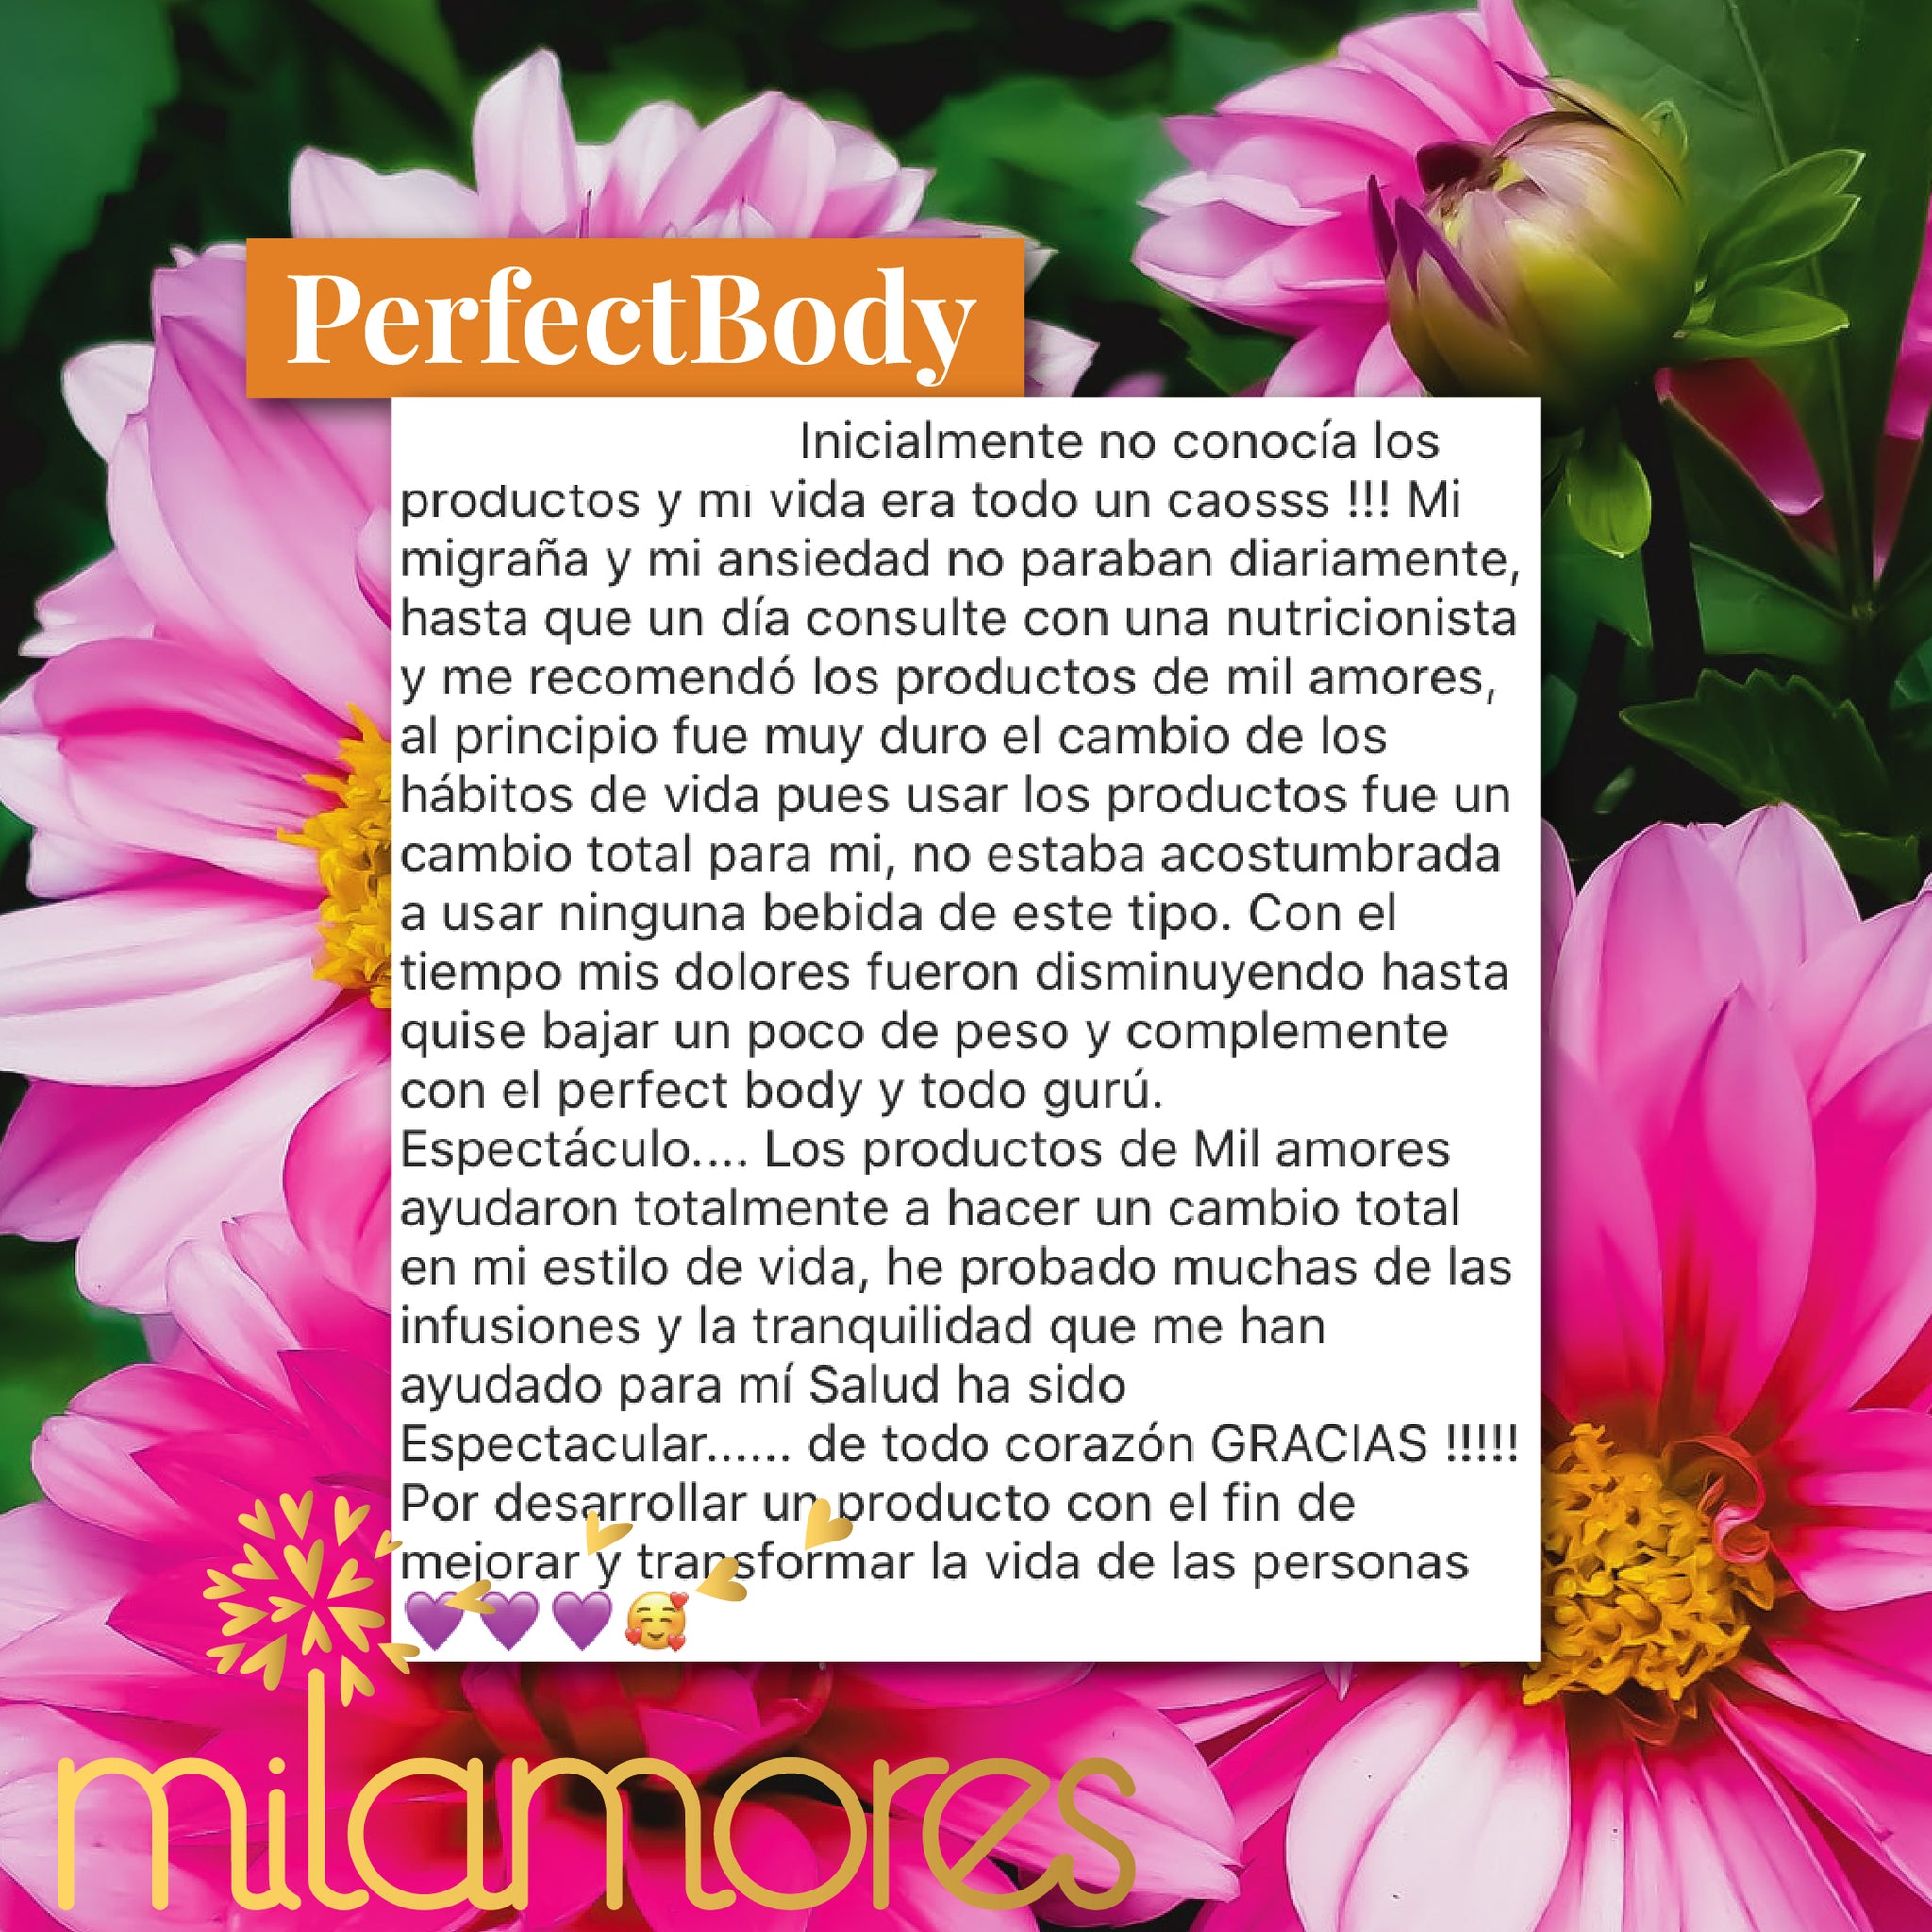 PerfectBody-Milamores-Colombia-Infusiones-Bajardepeso